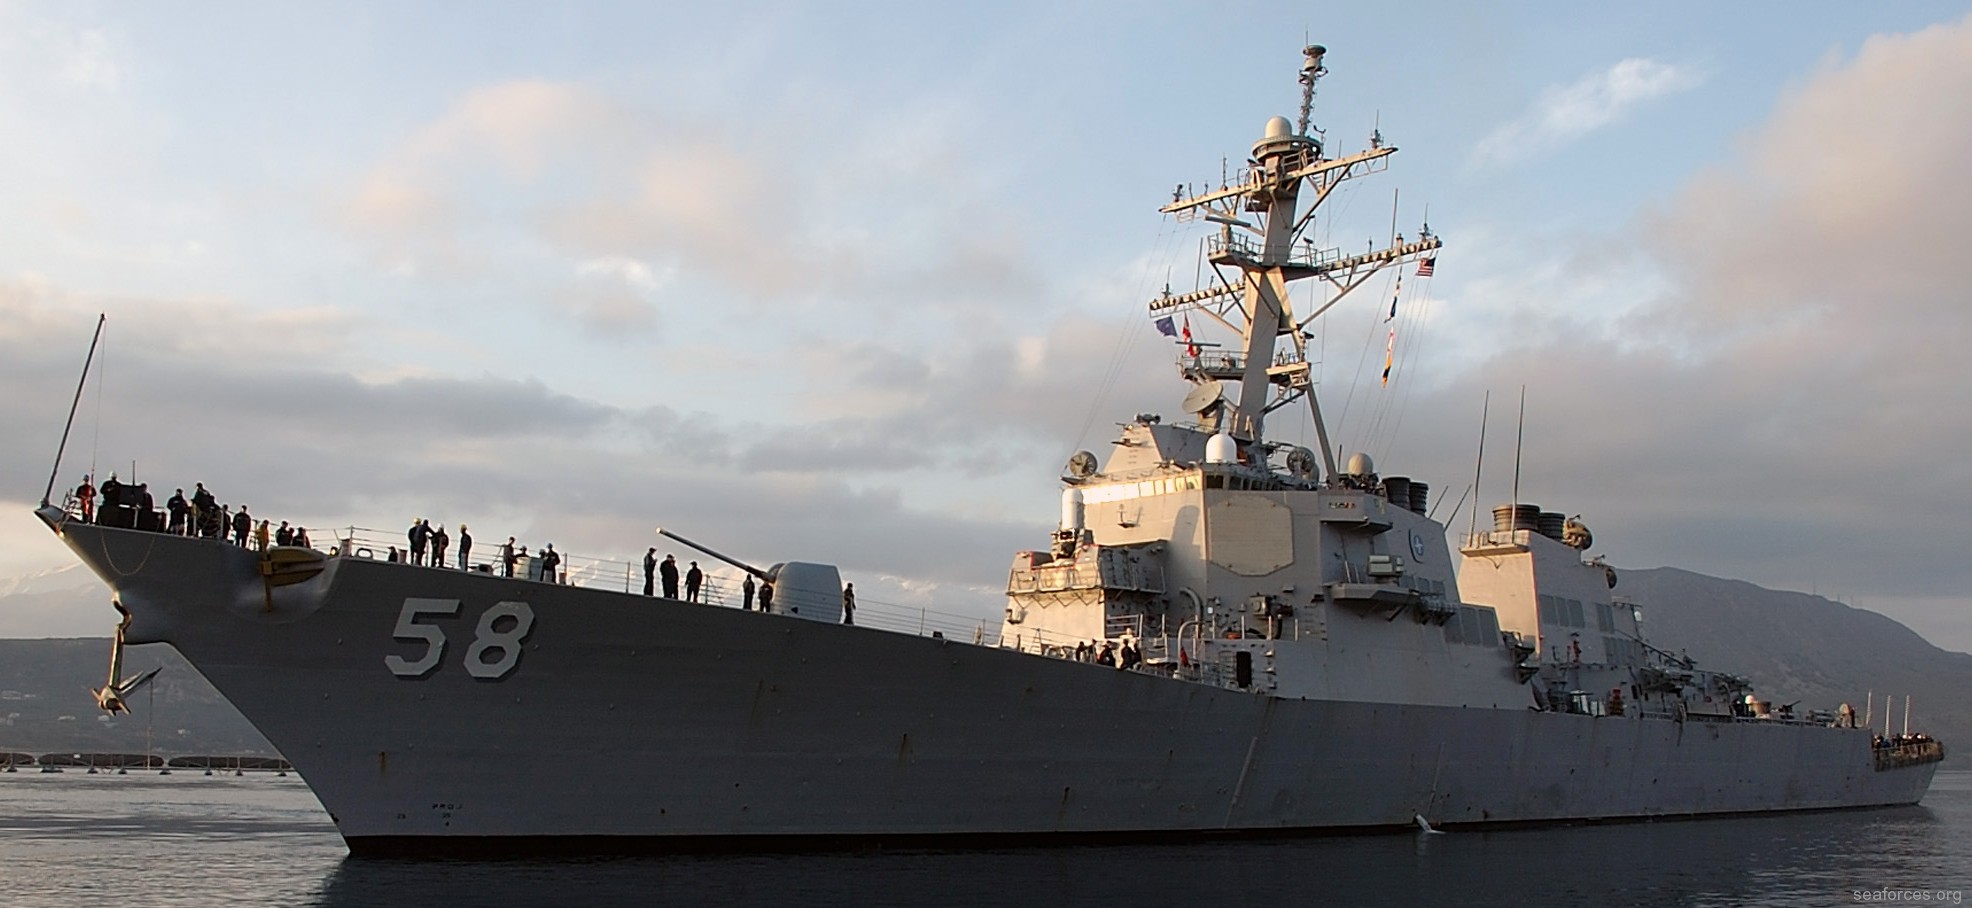 ddg-58 uss laboon guided missile destroyer us navy 86